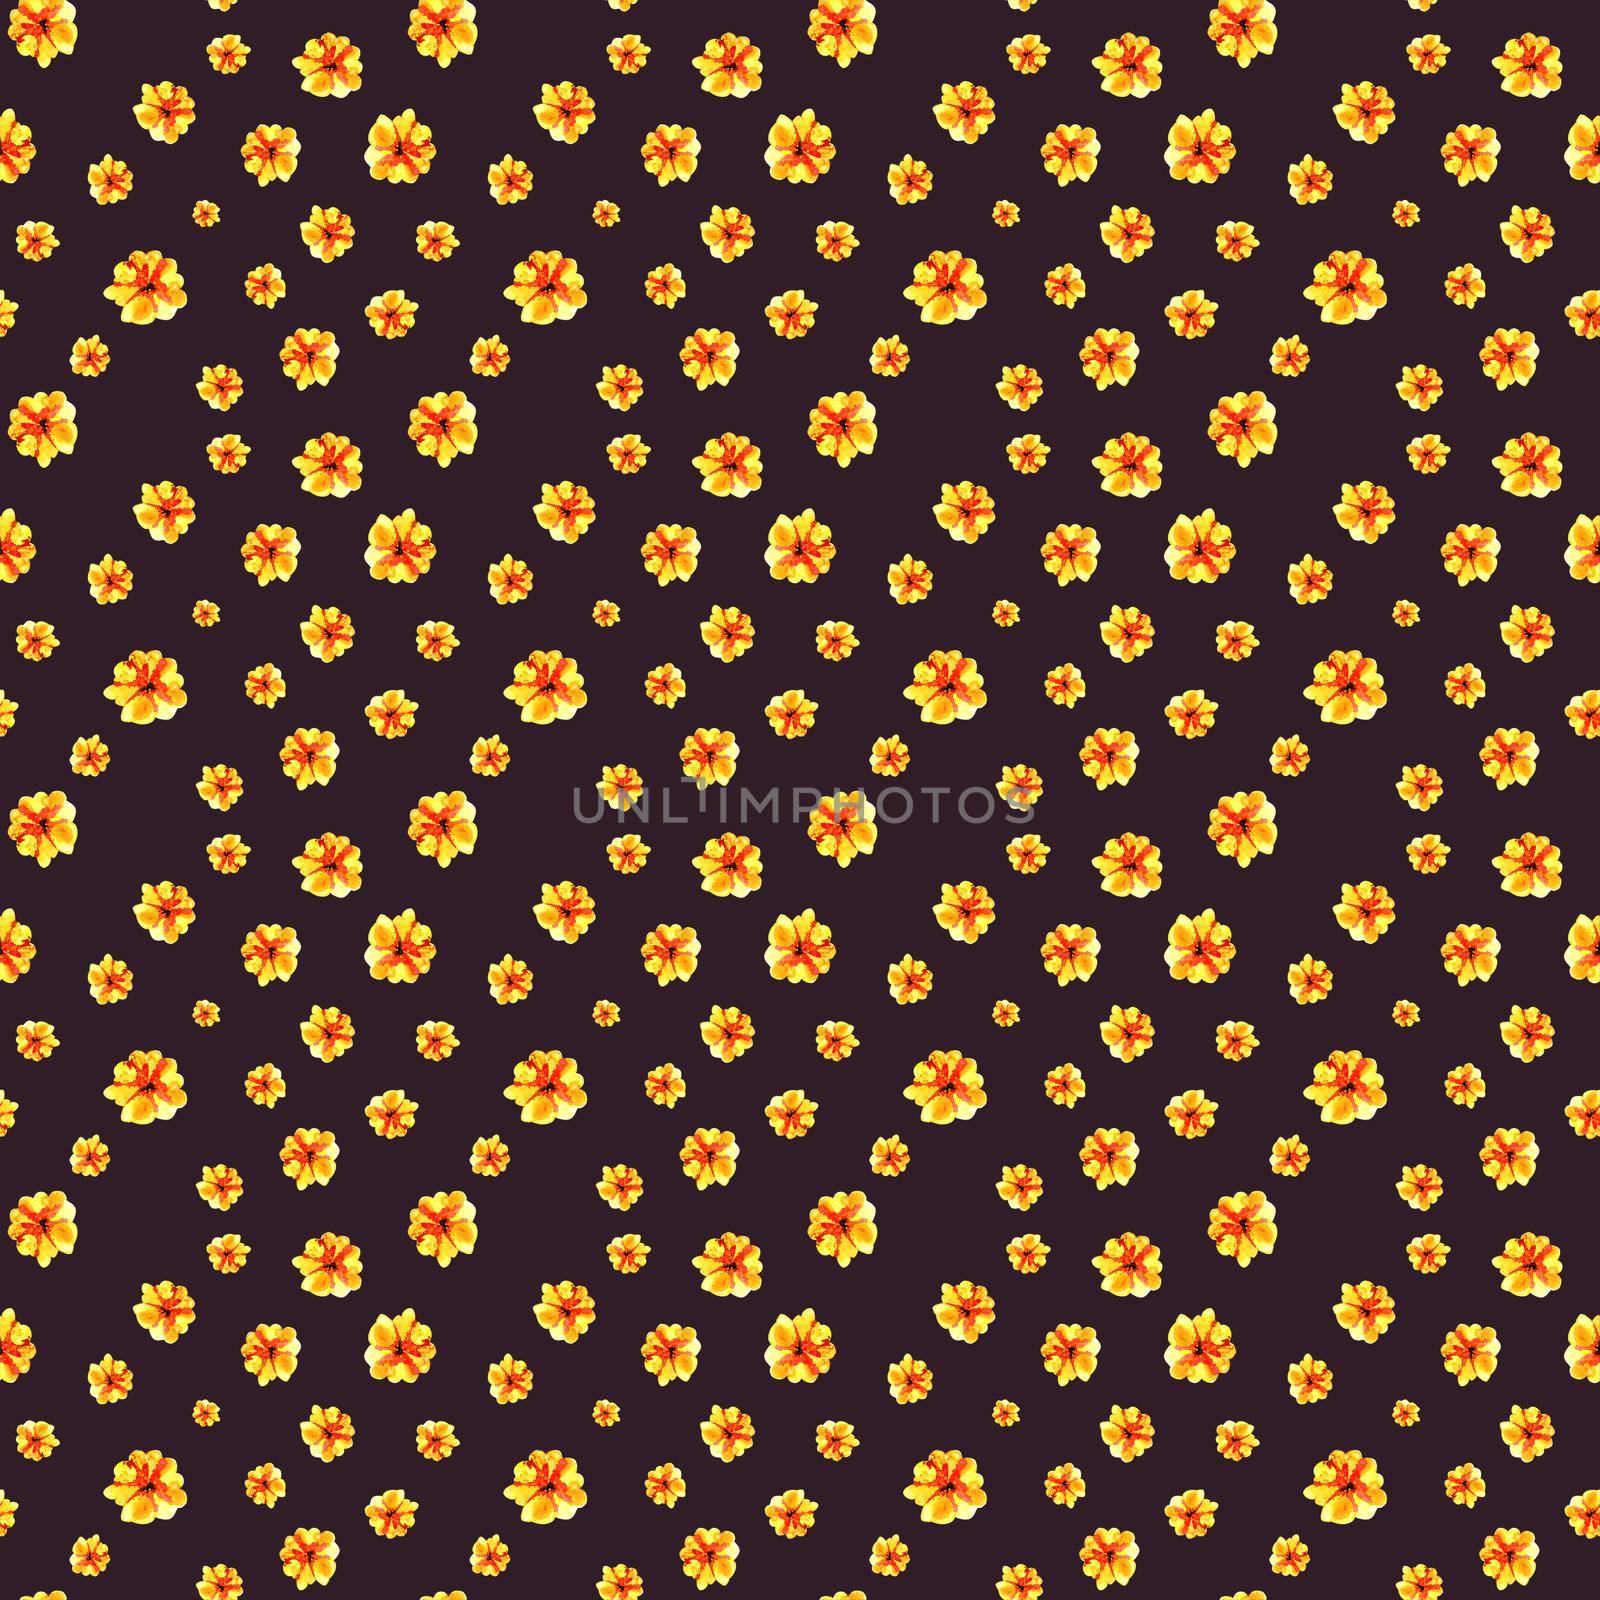 Lovely floral seamless pattern illustration of yellow flower on violet background